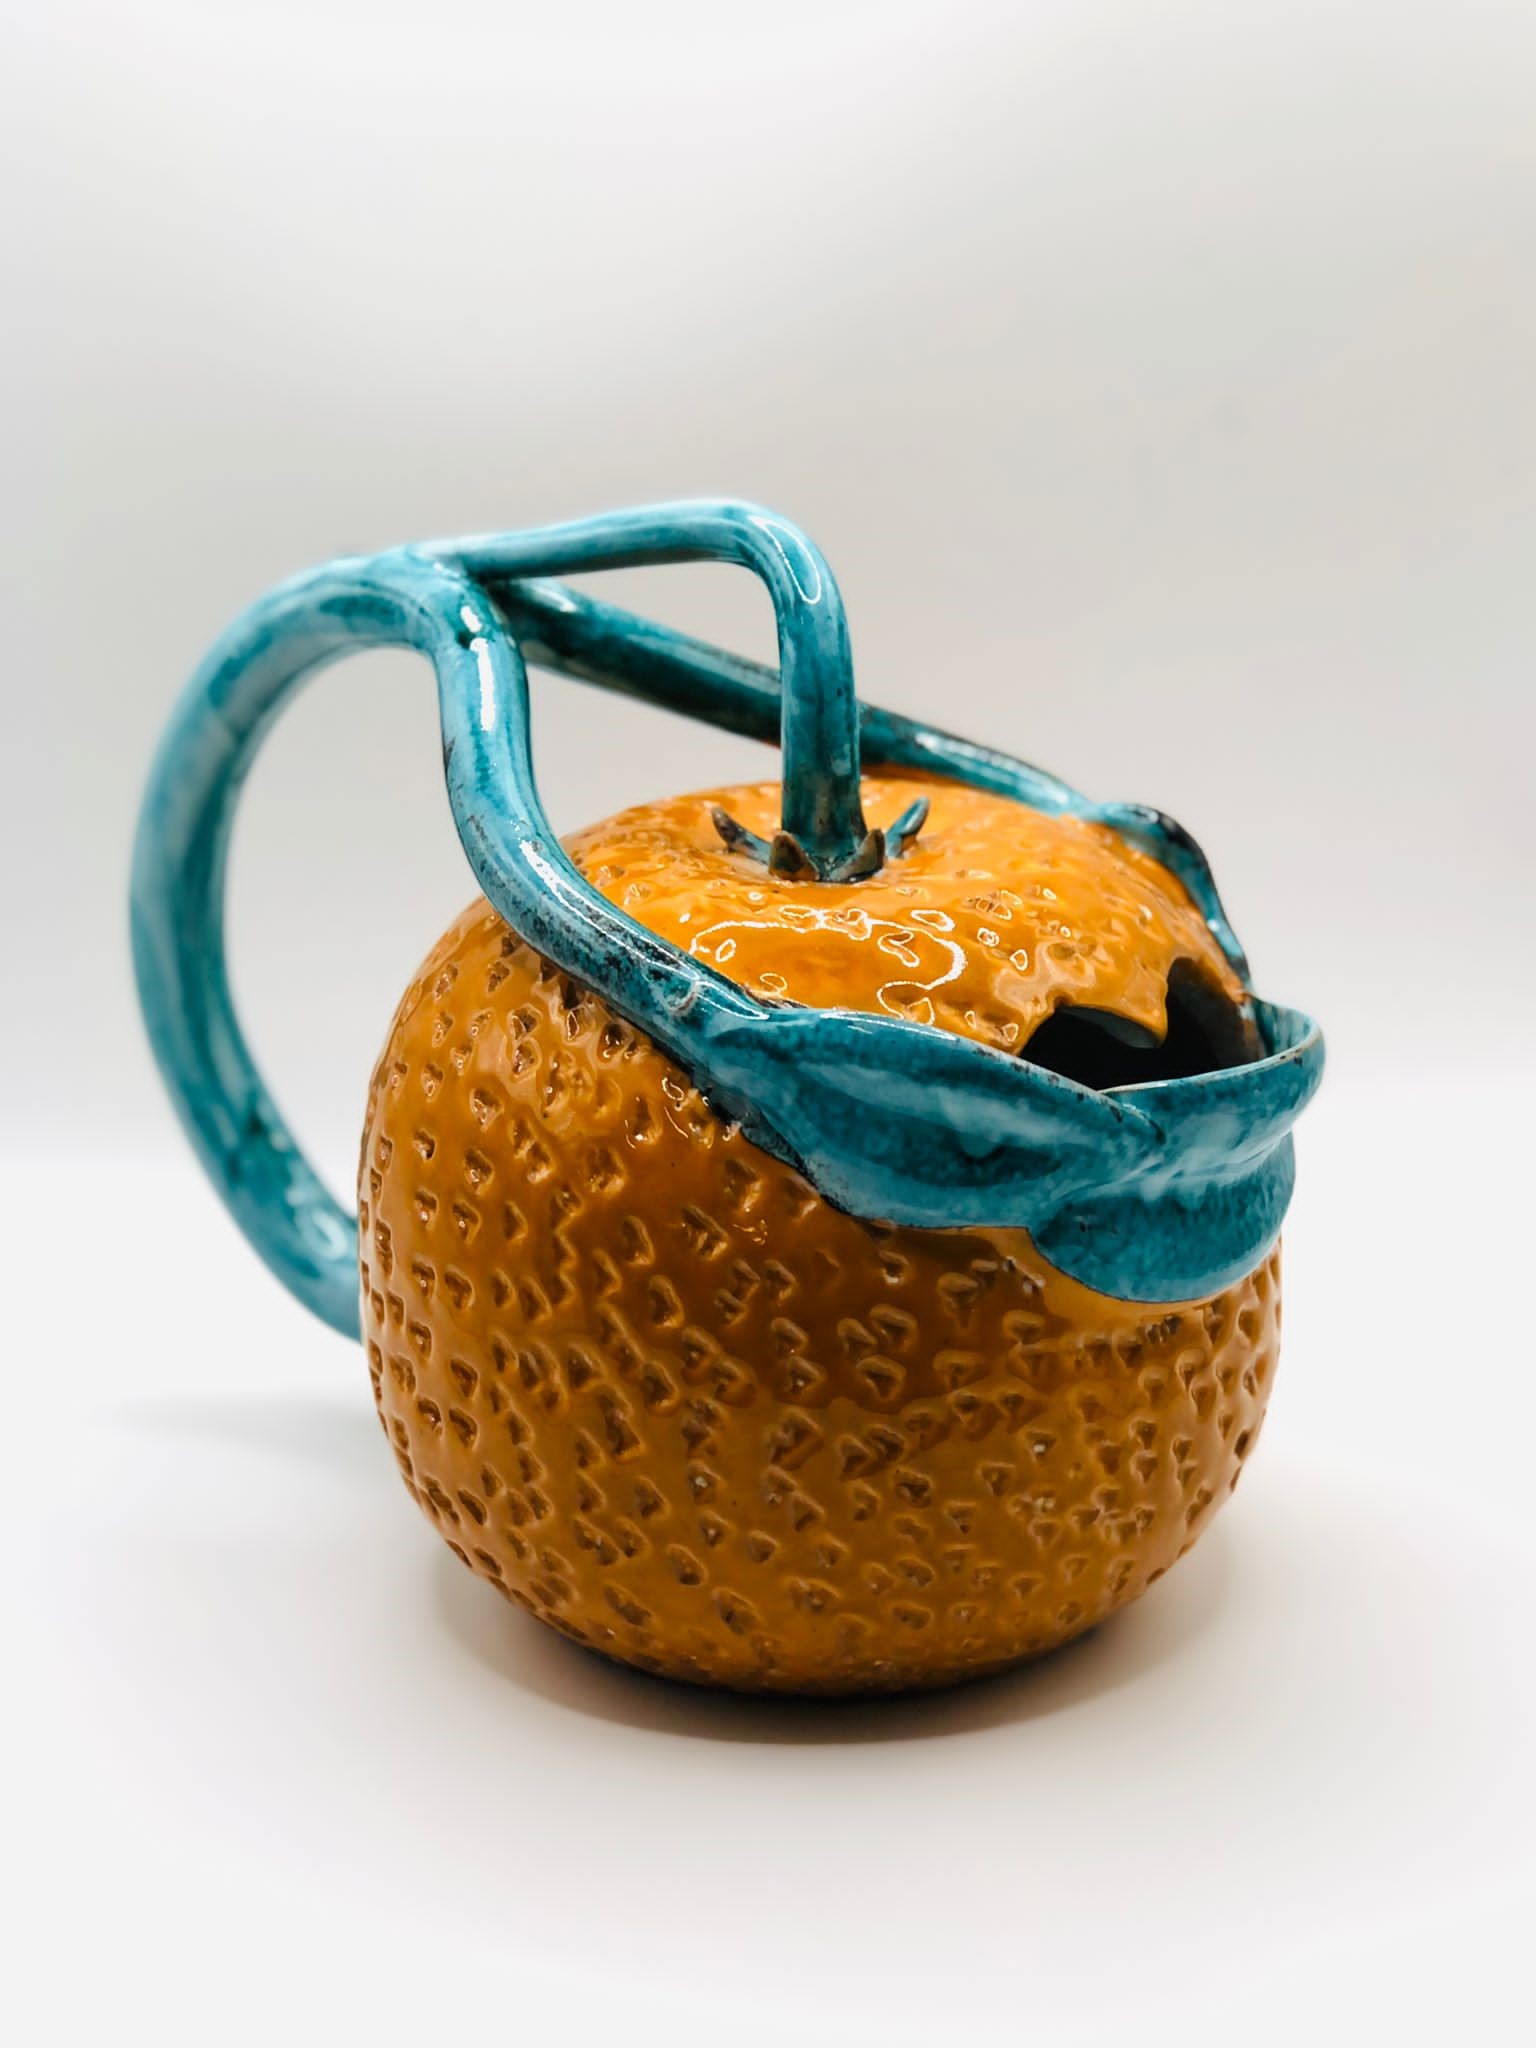 Vintage Handmade Painted Jugs Lemon and Orange Made in Italy Rare Collectors - Image 5 of 5